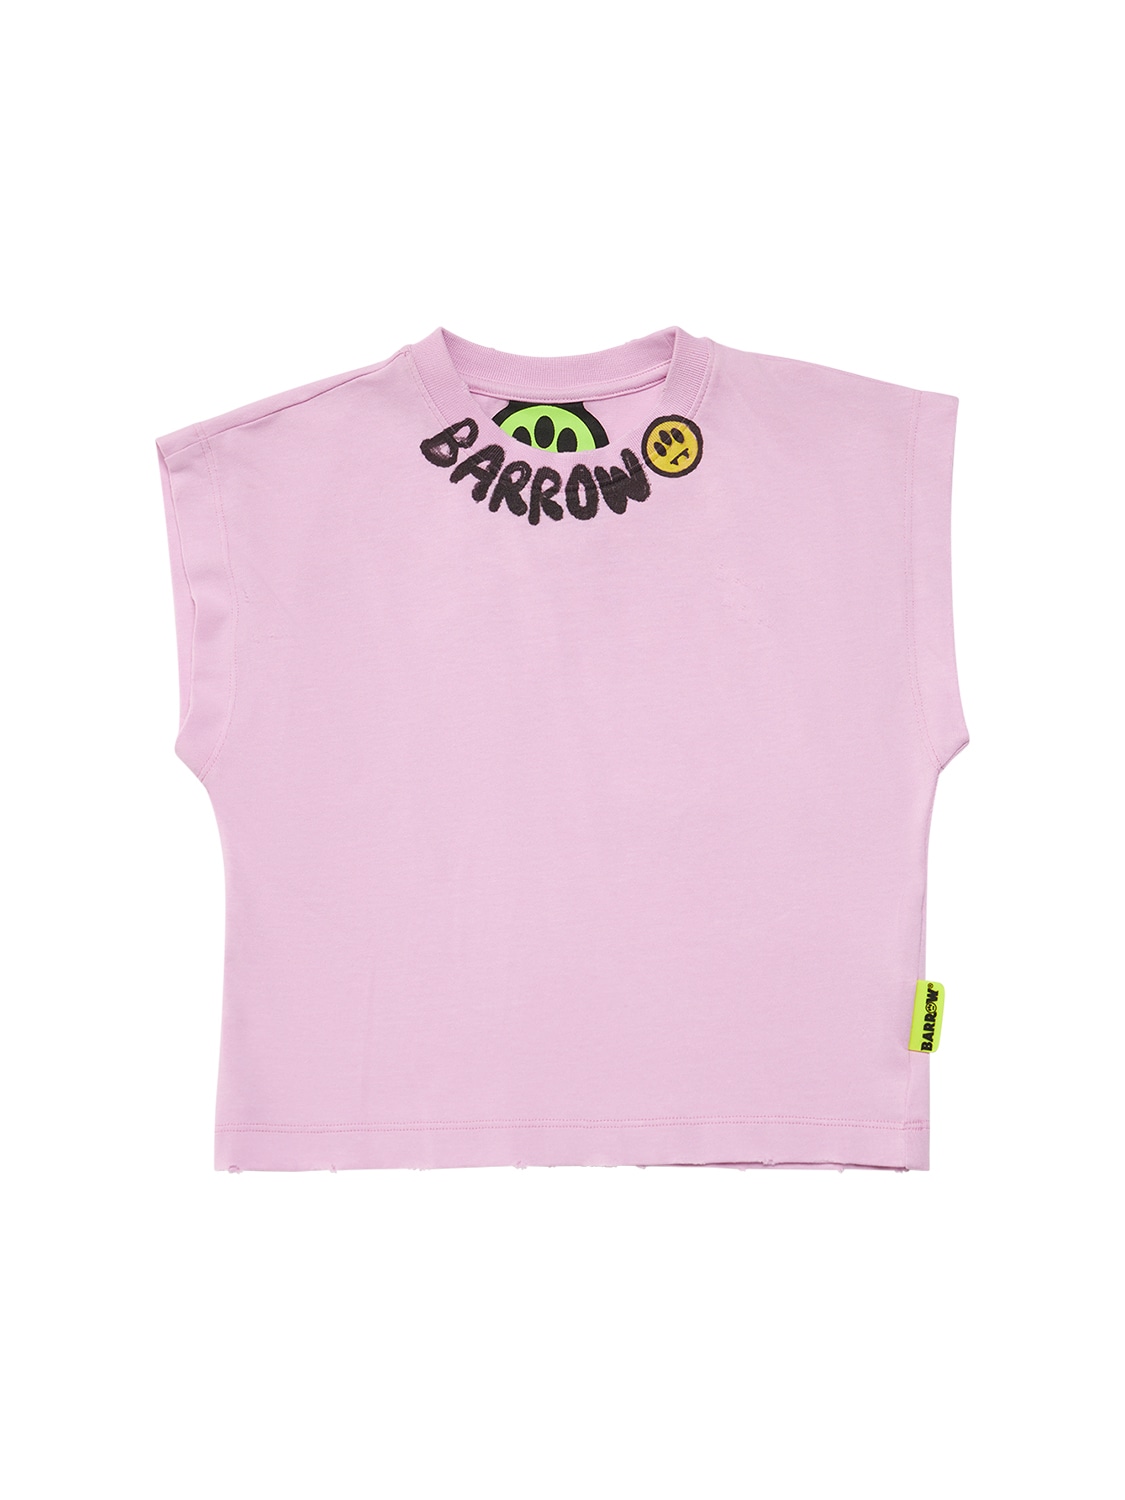 Barrow Kids' Printed Cotton Jersey Cropped T-shirt In 핑크